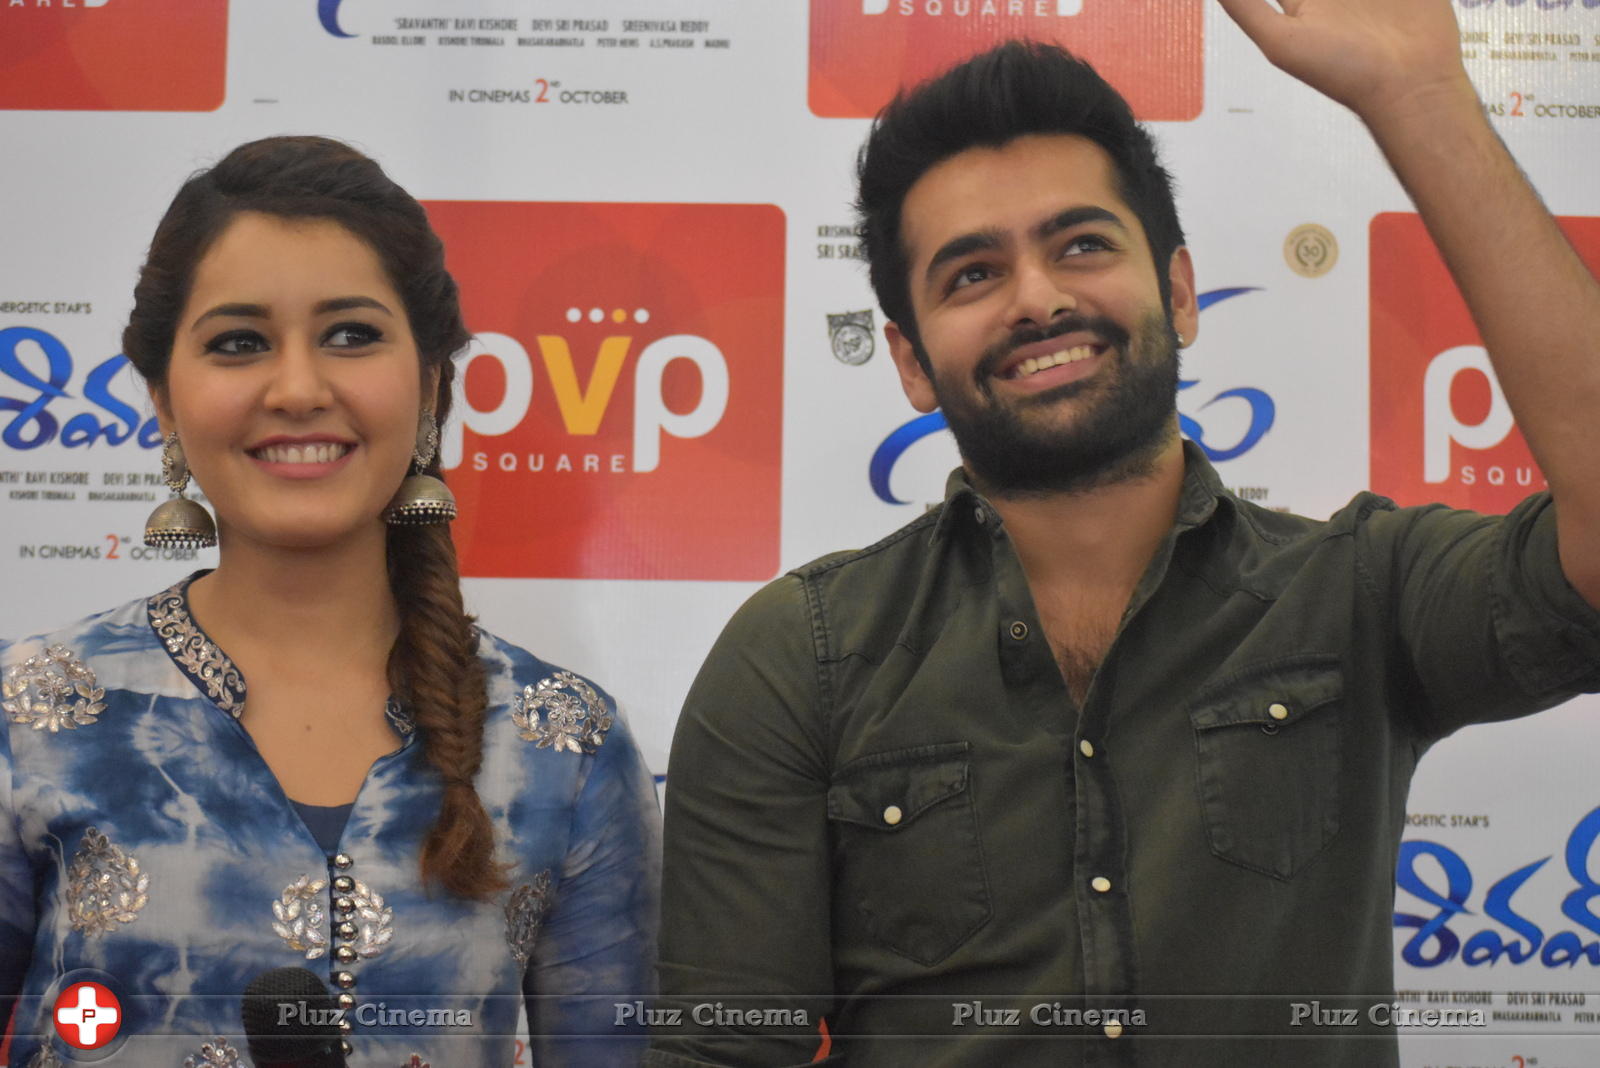 Shivam Movie Promotion at PVP Square Mall Photos | Picture 1125192